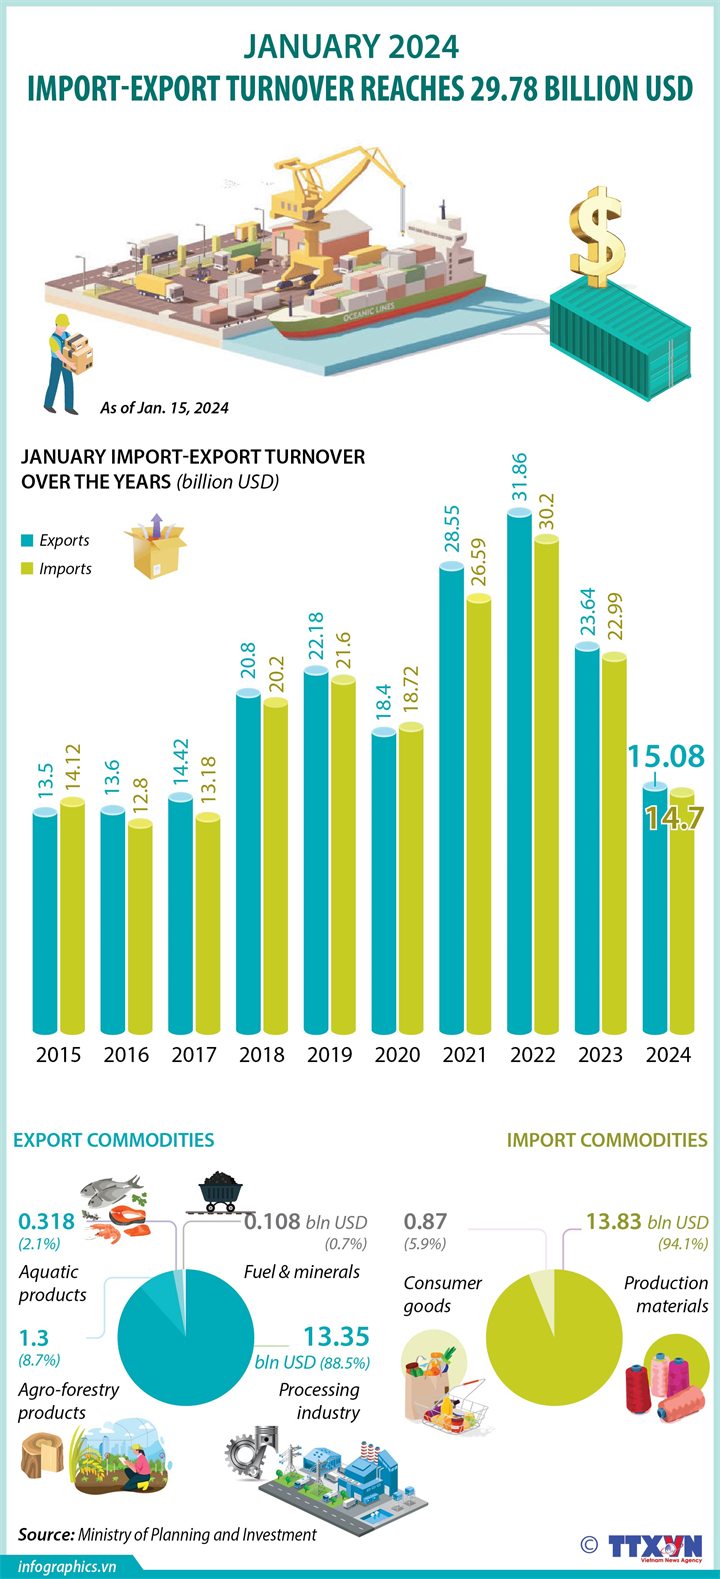 Import-export turnover reaches 29.78 billion USD in January